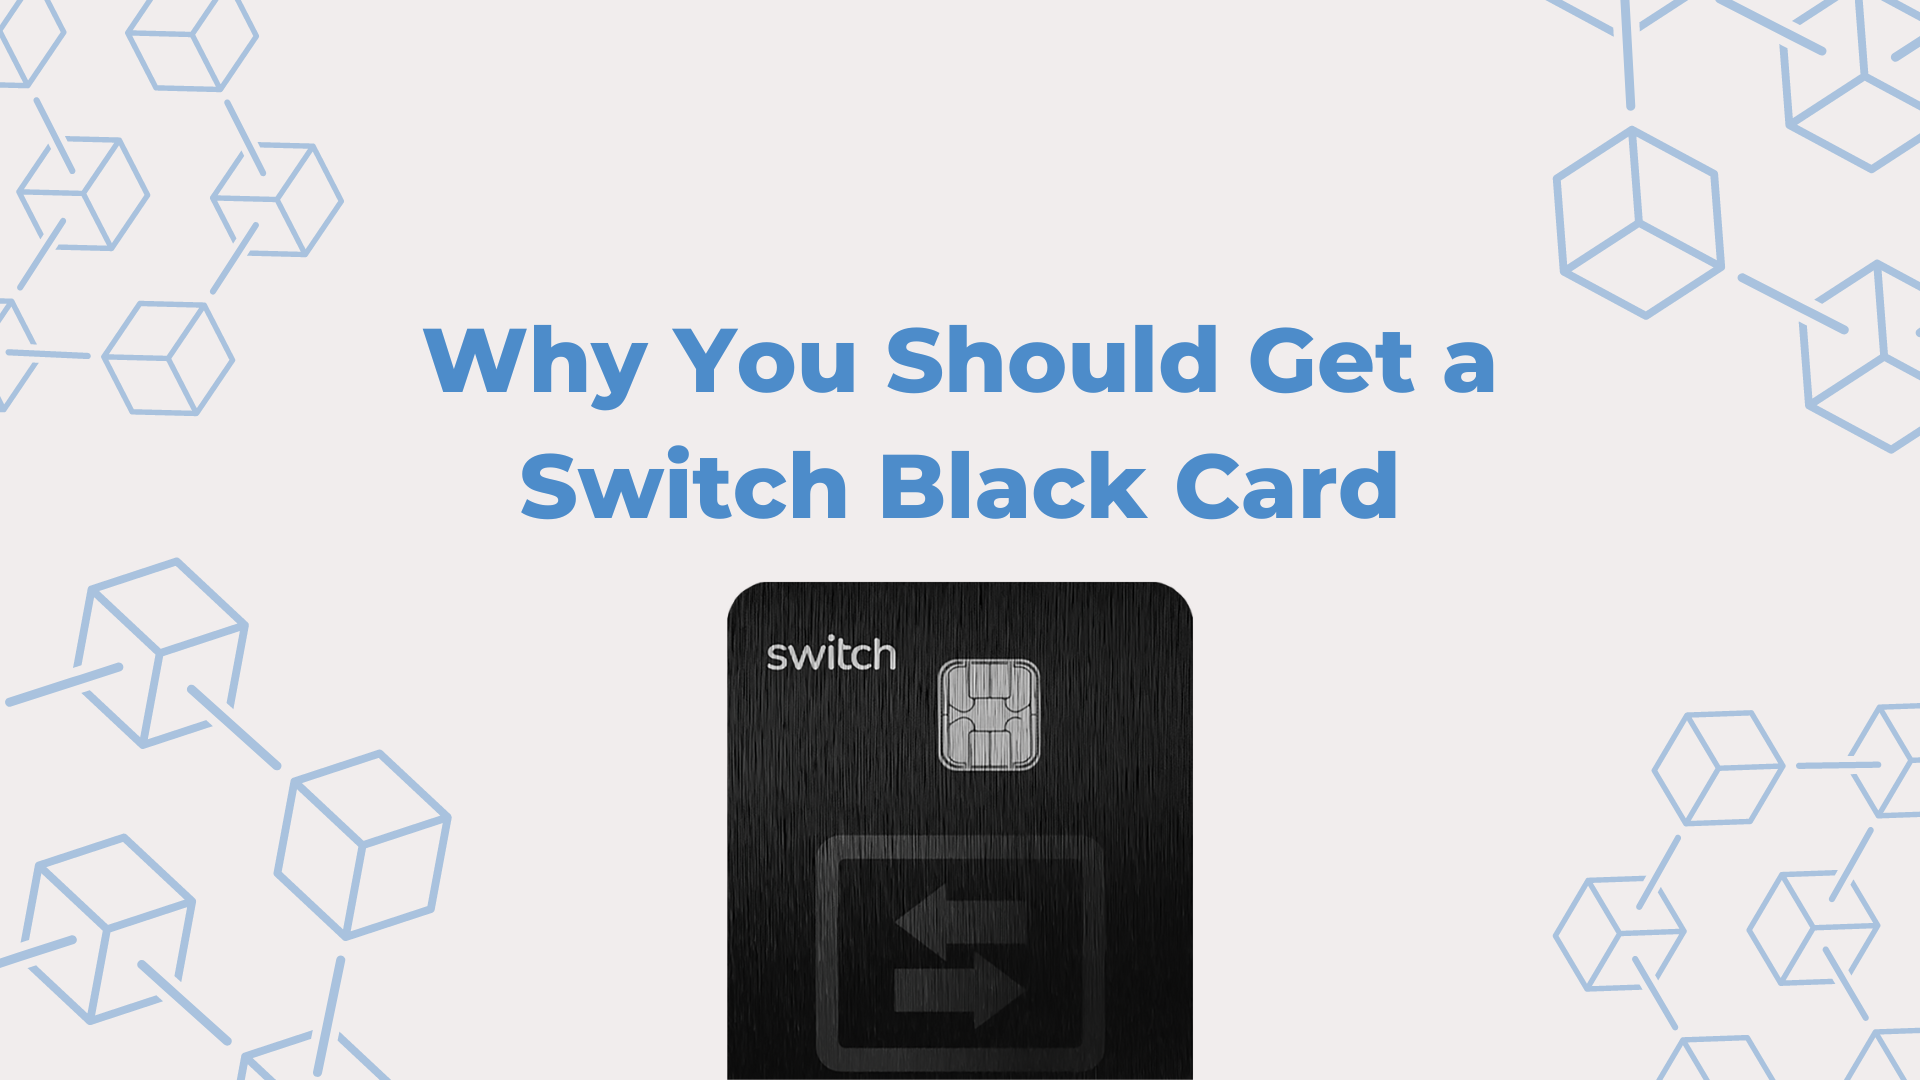 Why You Should Get a Black Card